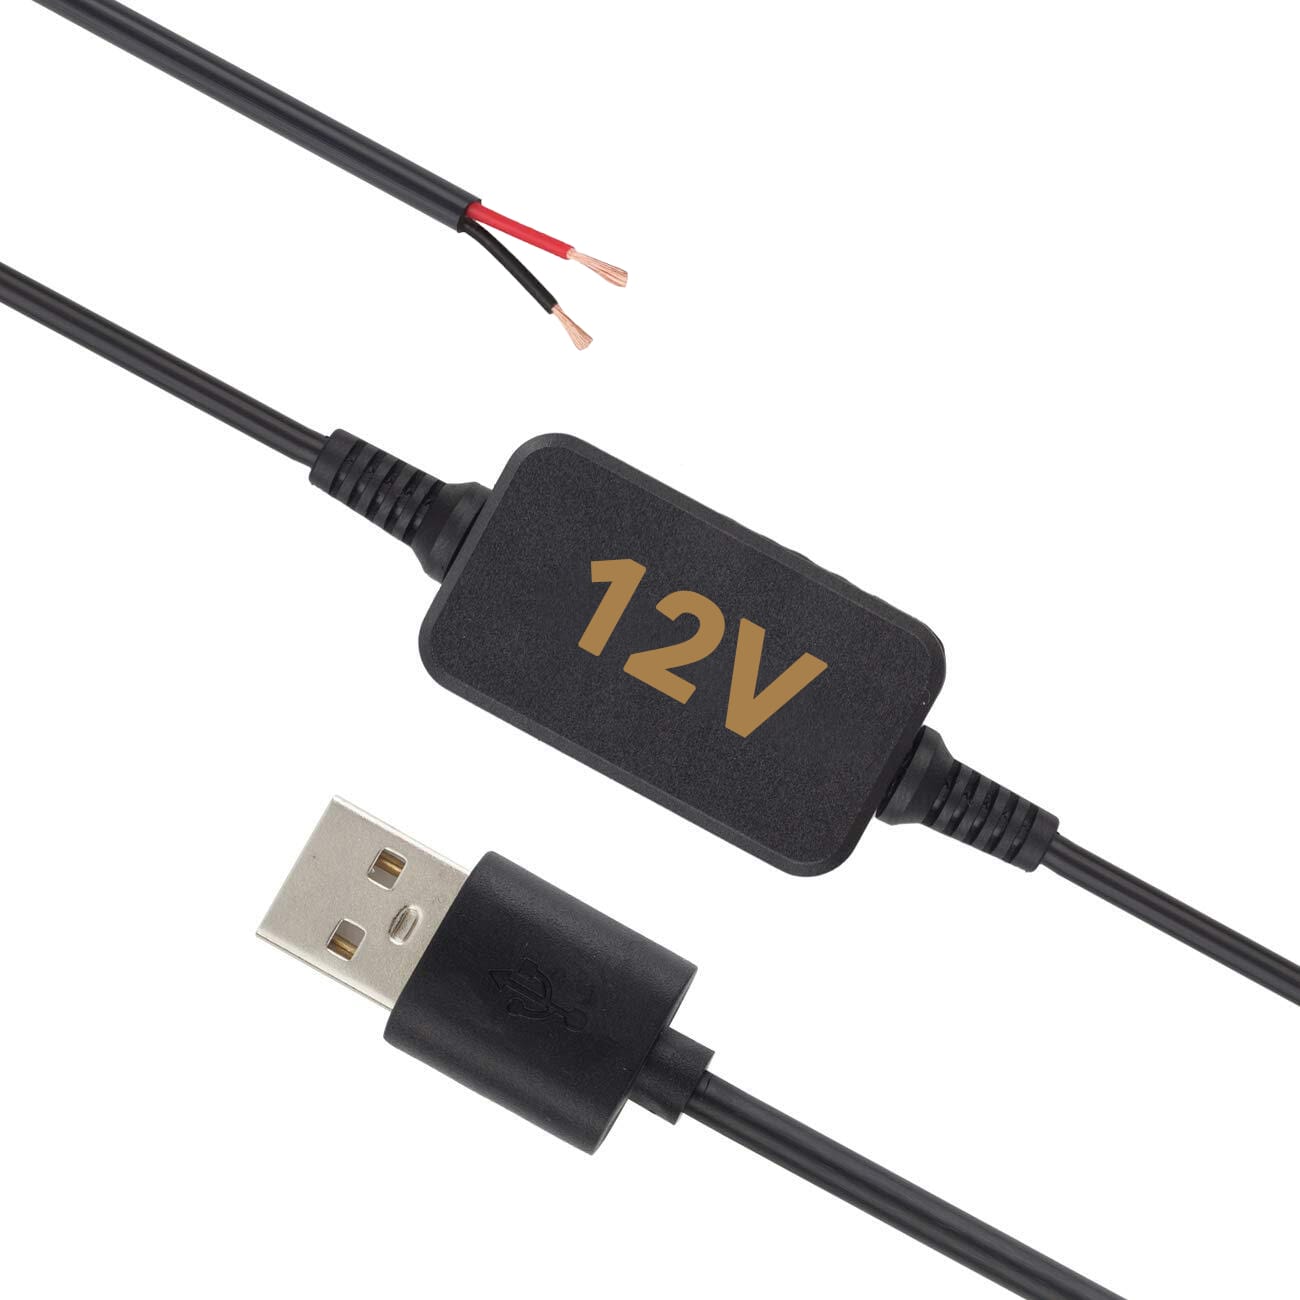 12V USB Power Cable